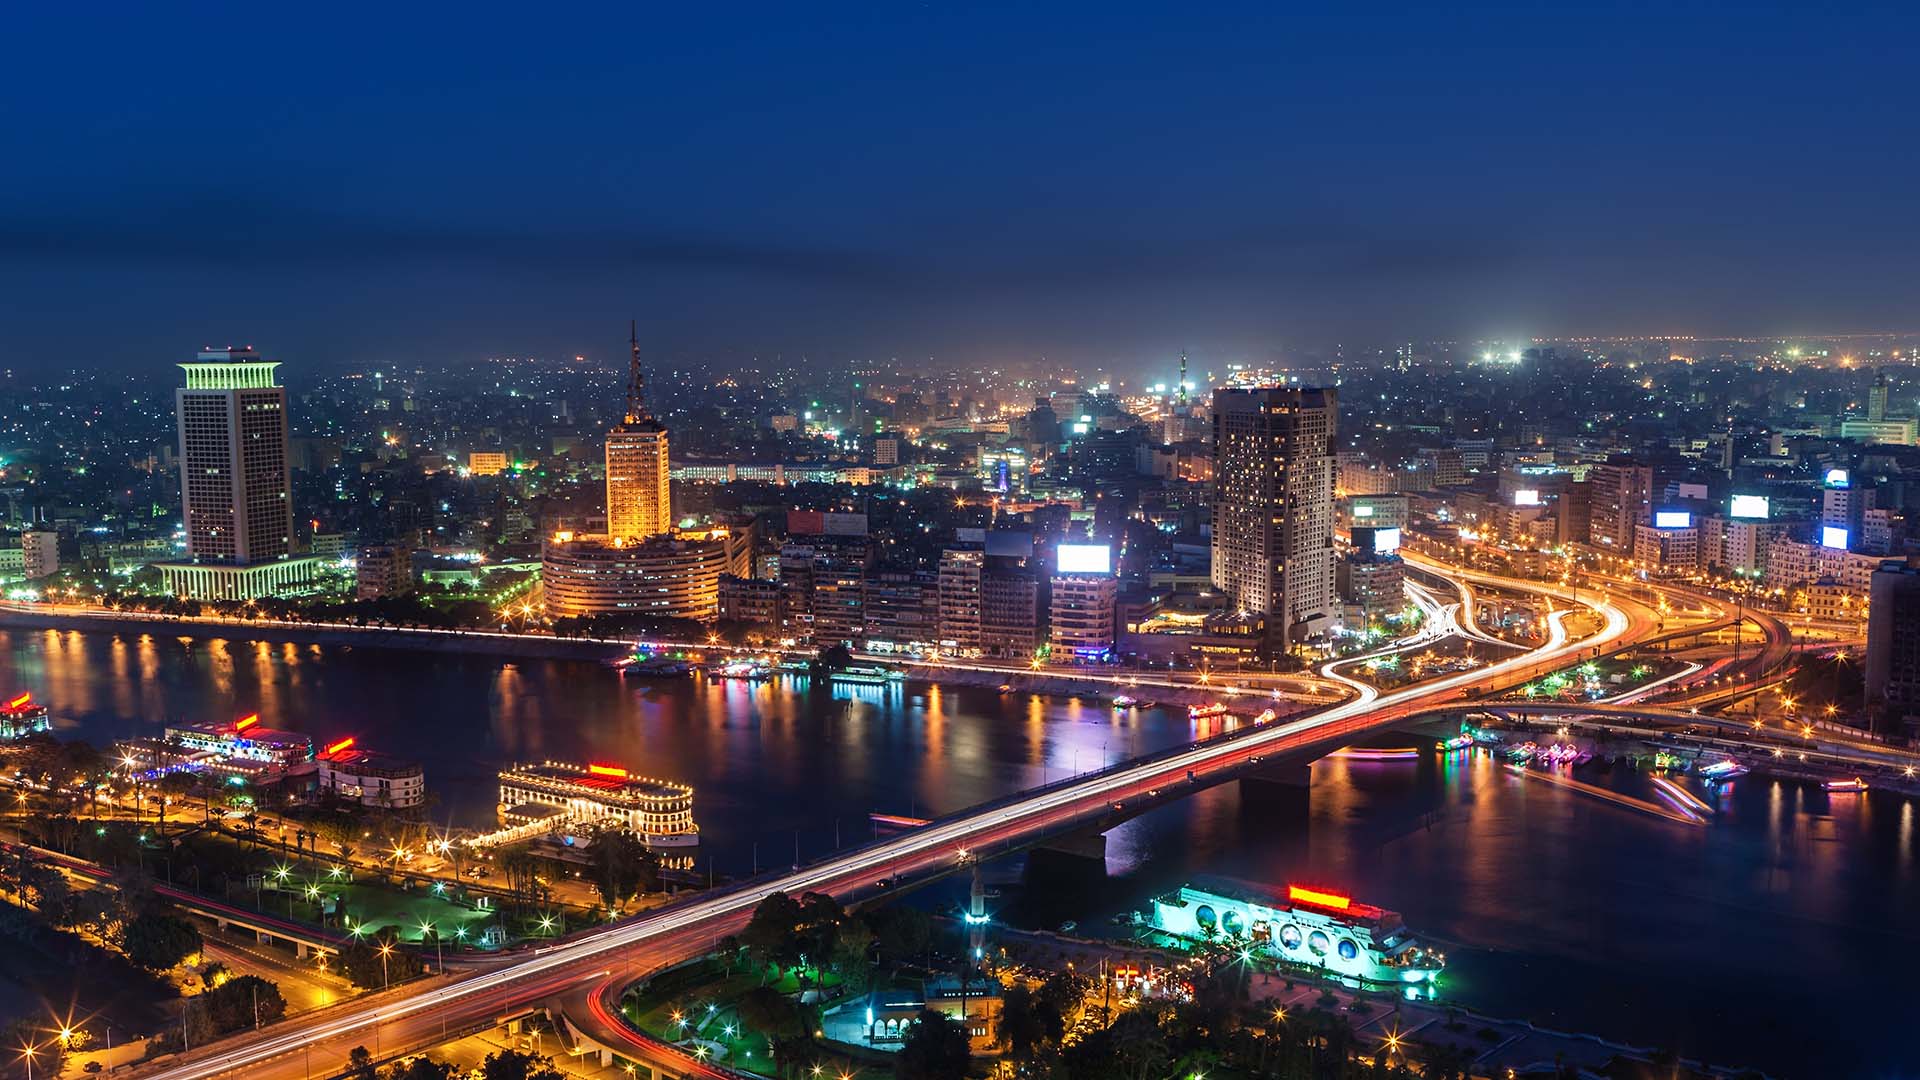 Cairo on Trend: Find Glamorous Egyptian Experiences in New Cairo and Beyond (Cairo)